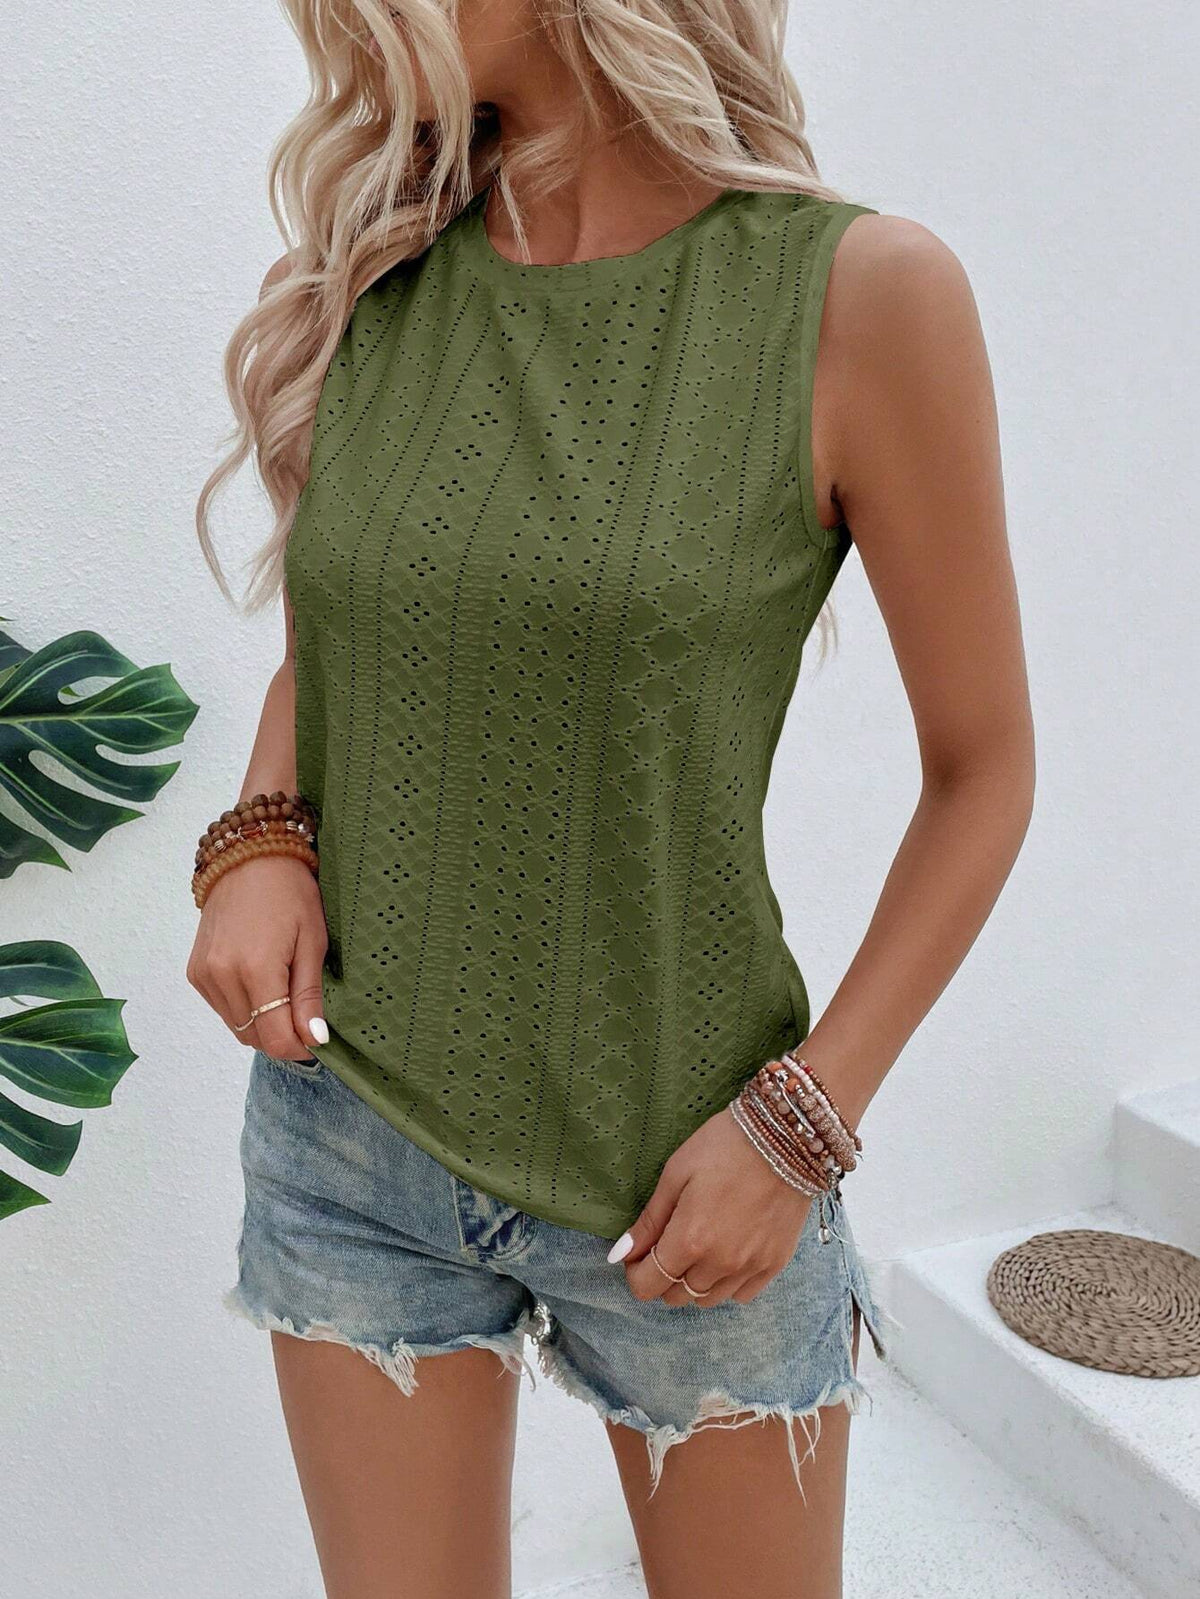 Solid Embroidery Pattern Tank Top